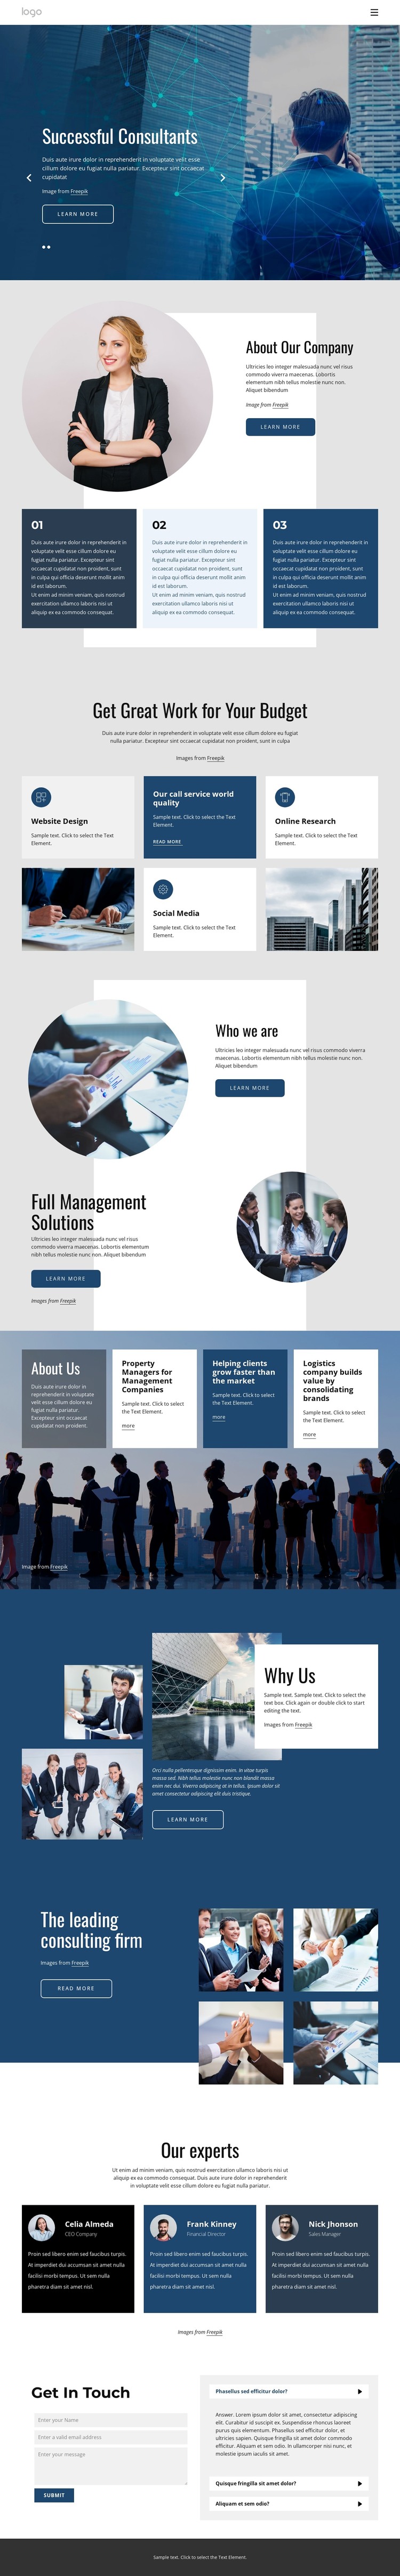 We offer tailored consulting services WordPress Theme